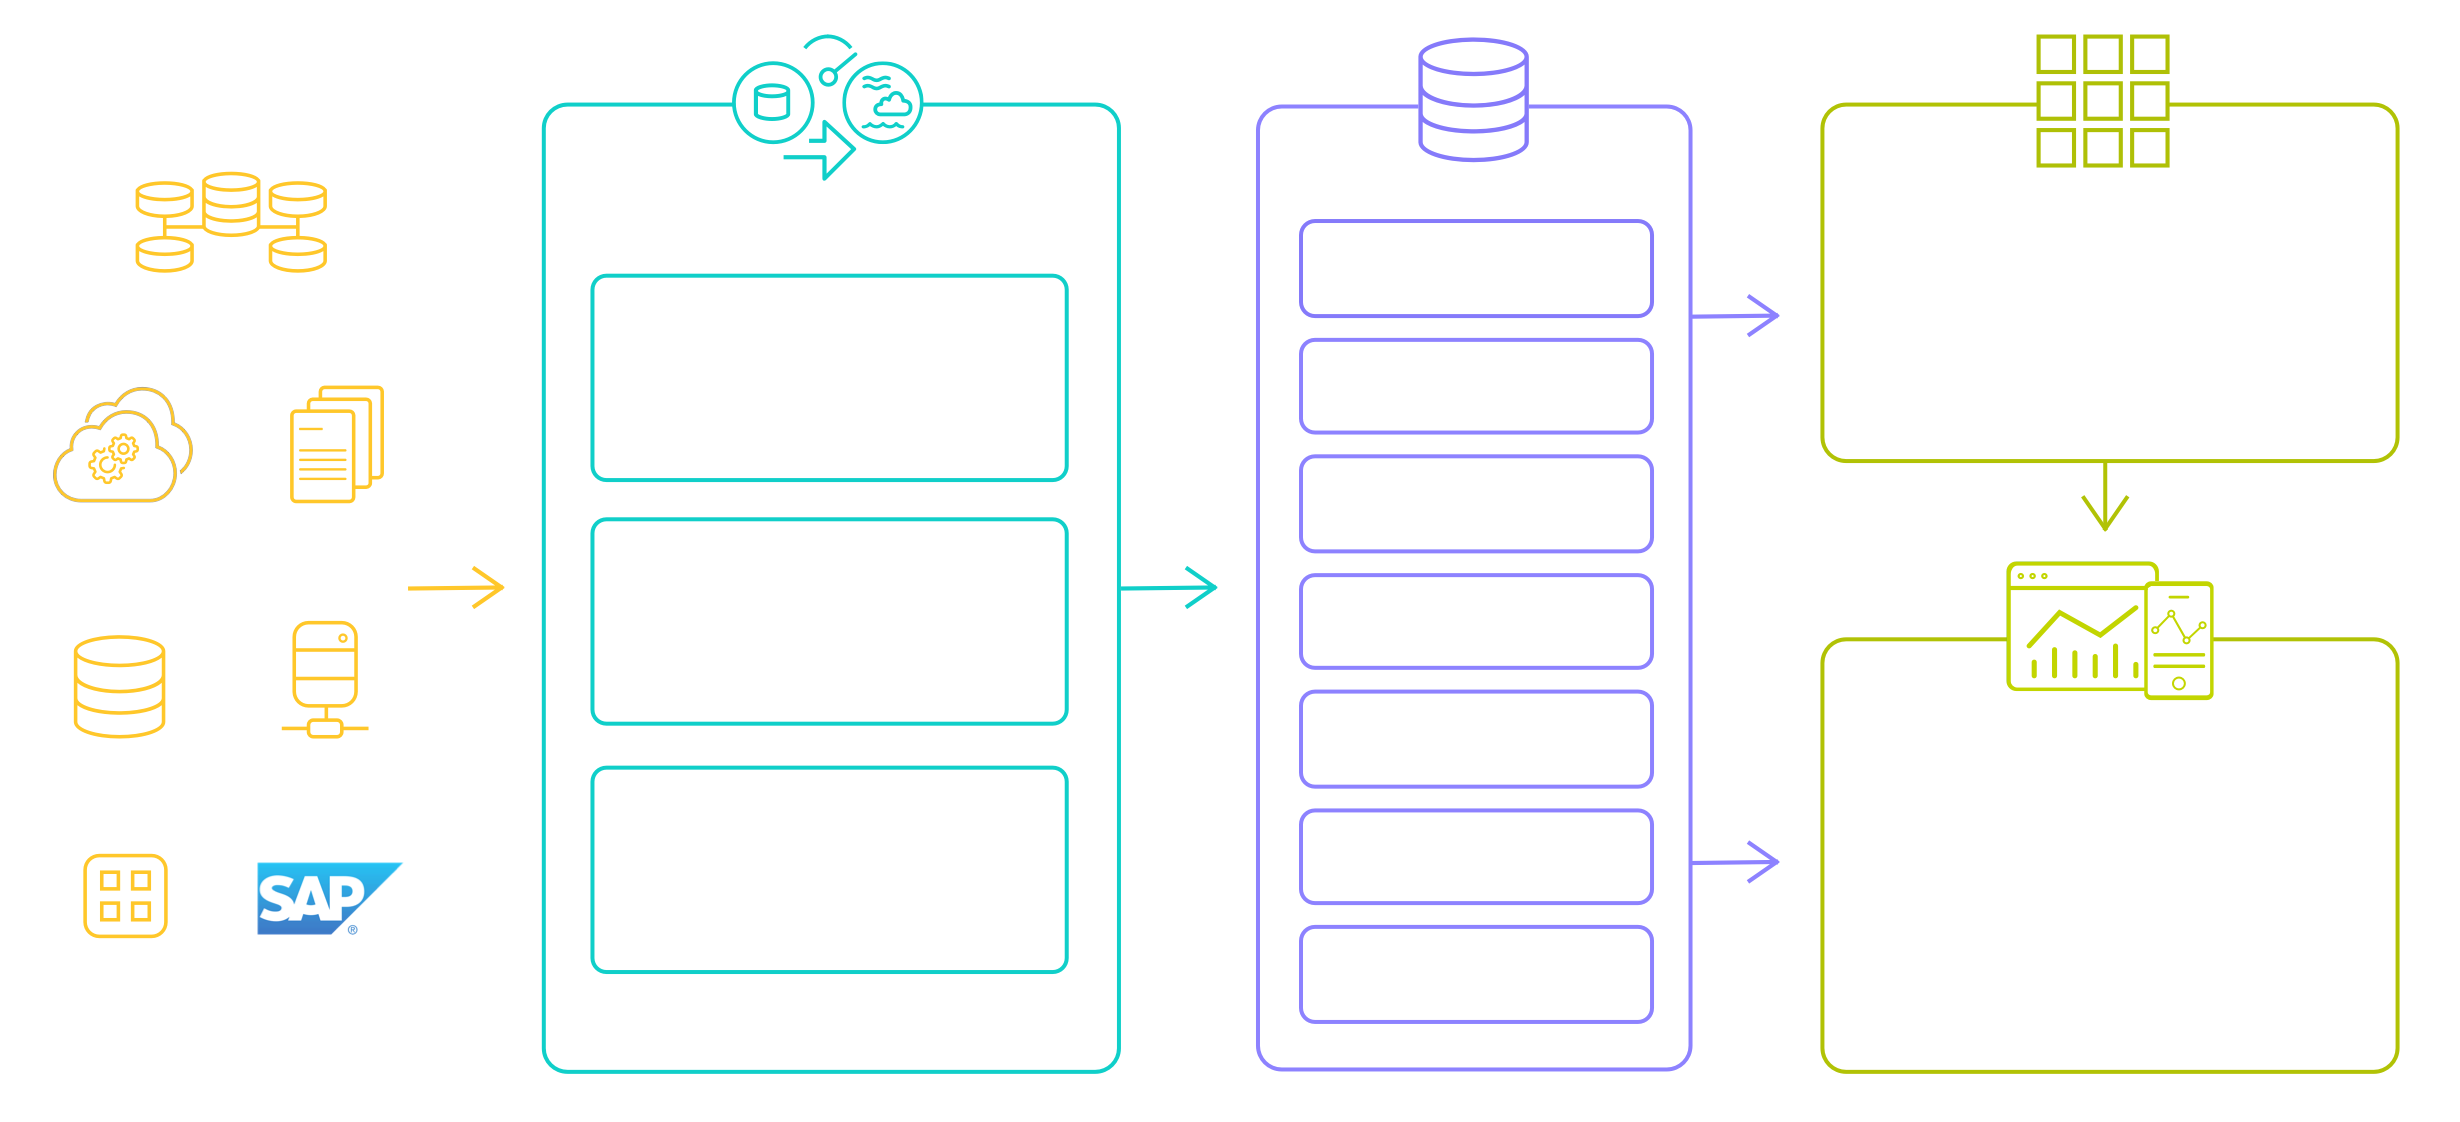 Architecture diagram illustrating how Qlik data integration products can quickly get data to Power BI or any analytics tool.